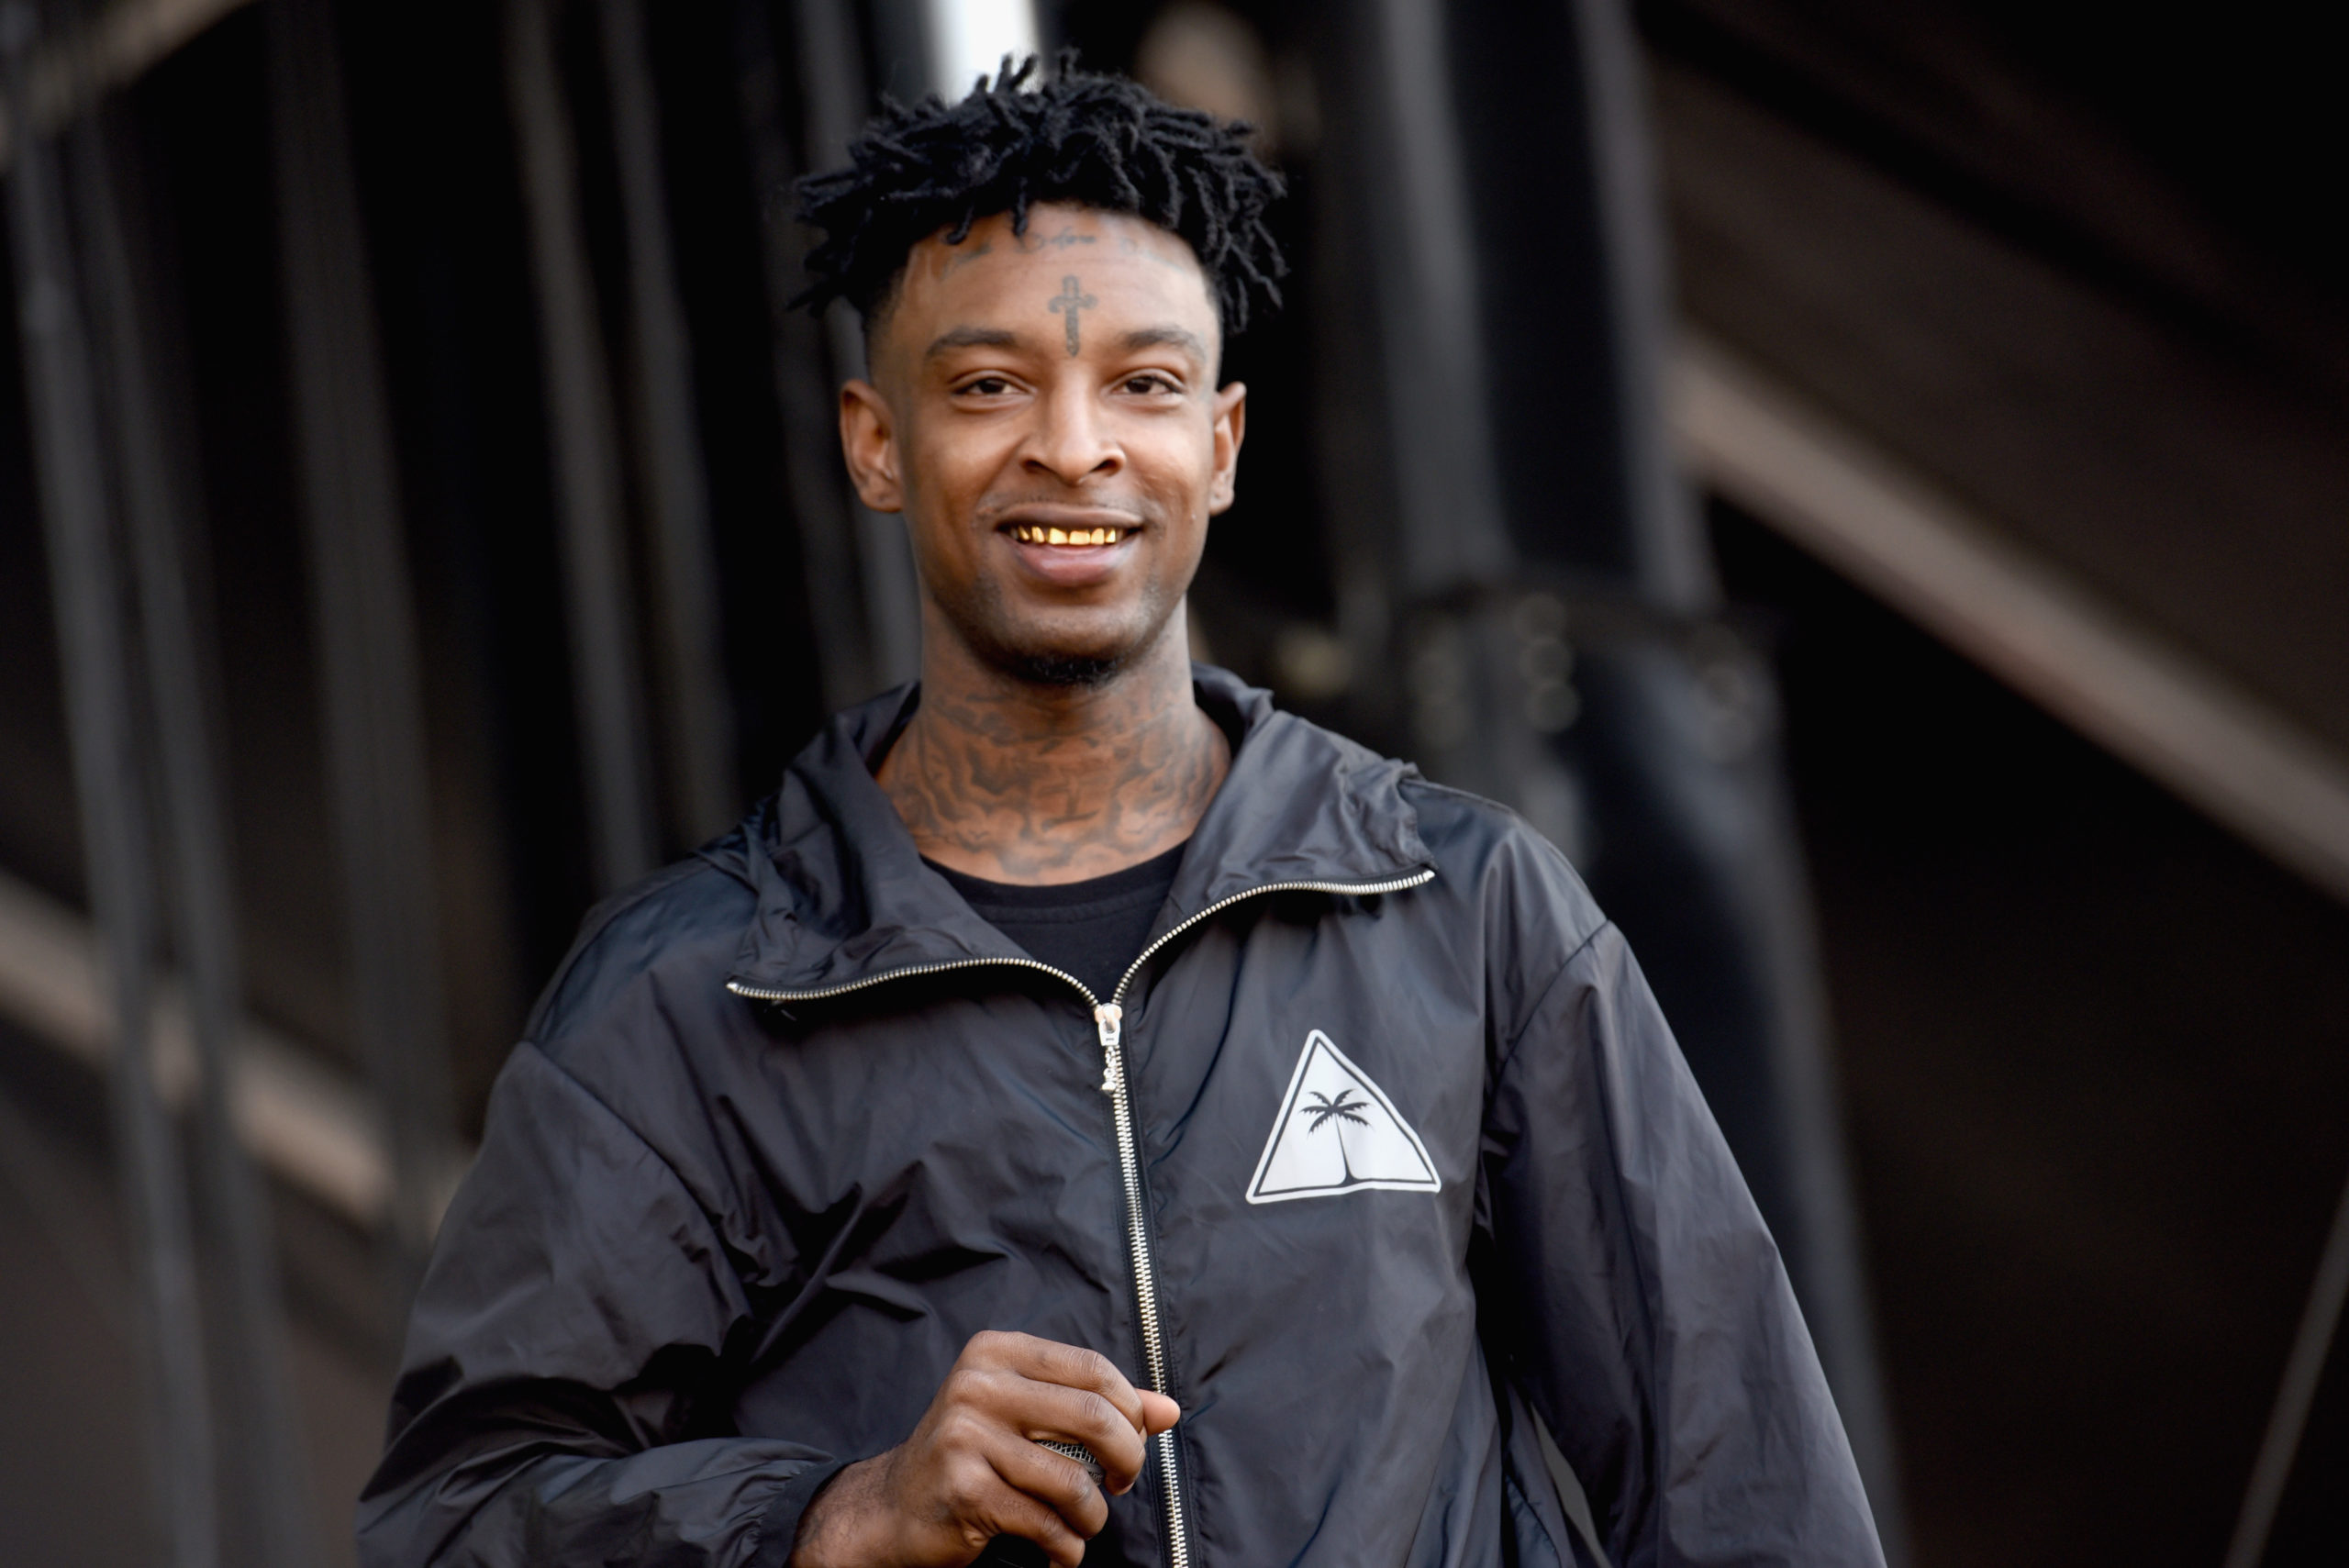 21 Savage Steps In To Pay For Funeral Of 3-Year-Old Tragically Killed